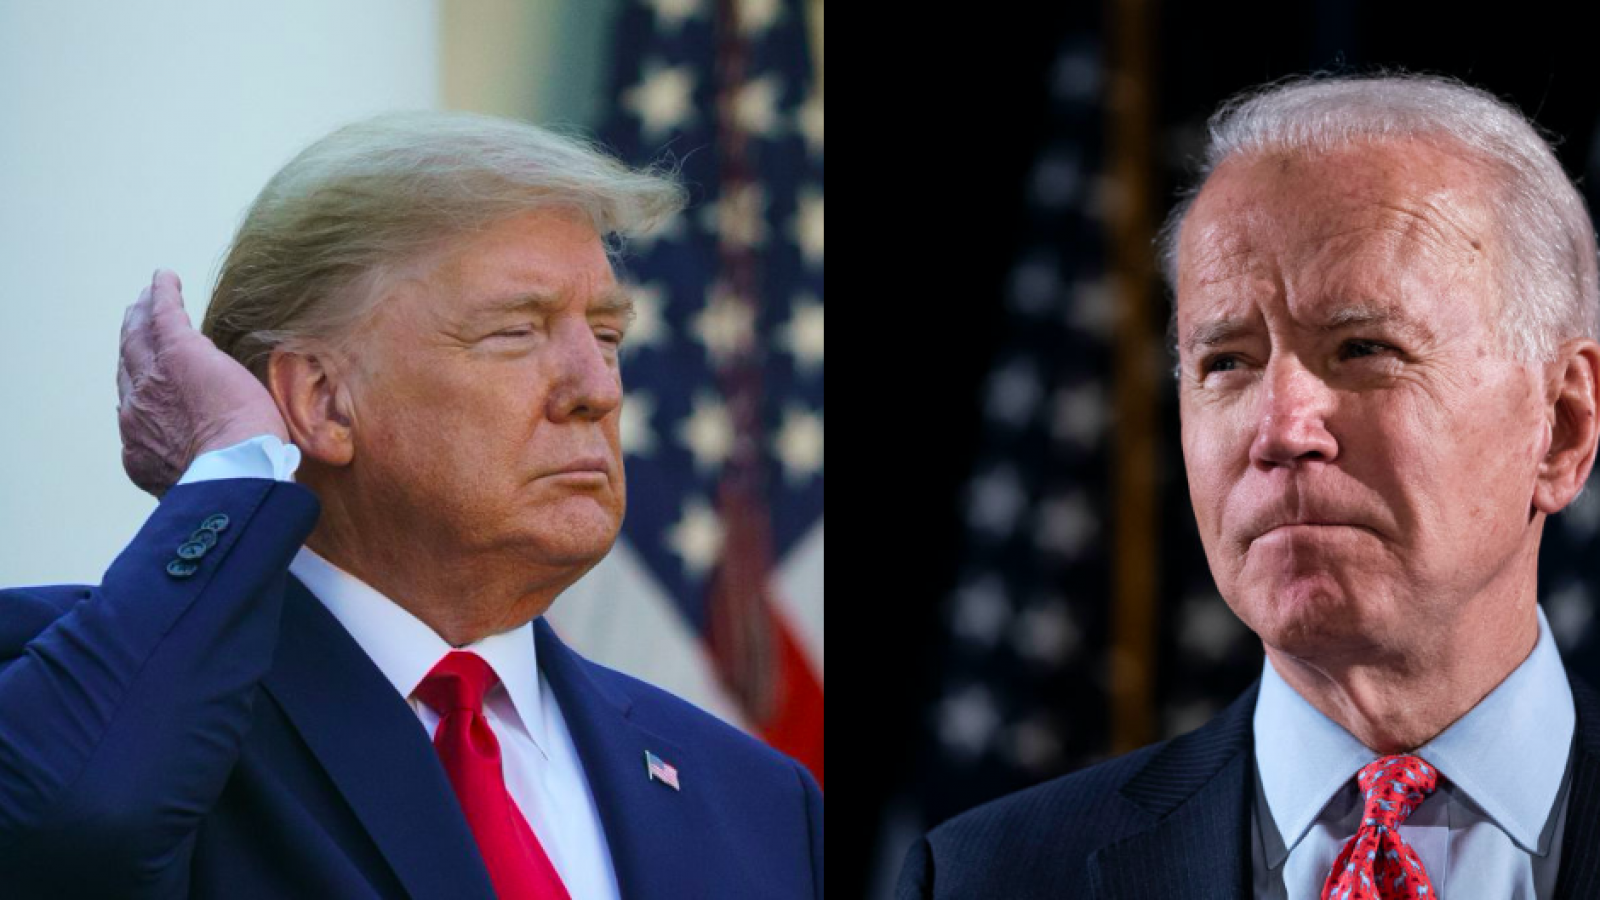 What the Polls Say About a Donald Trump vs Joe Biden Presidential Matchup